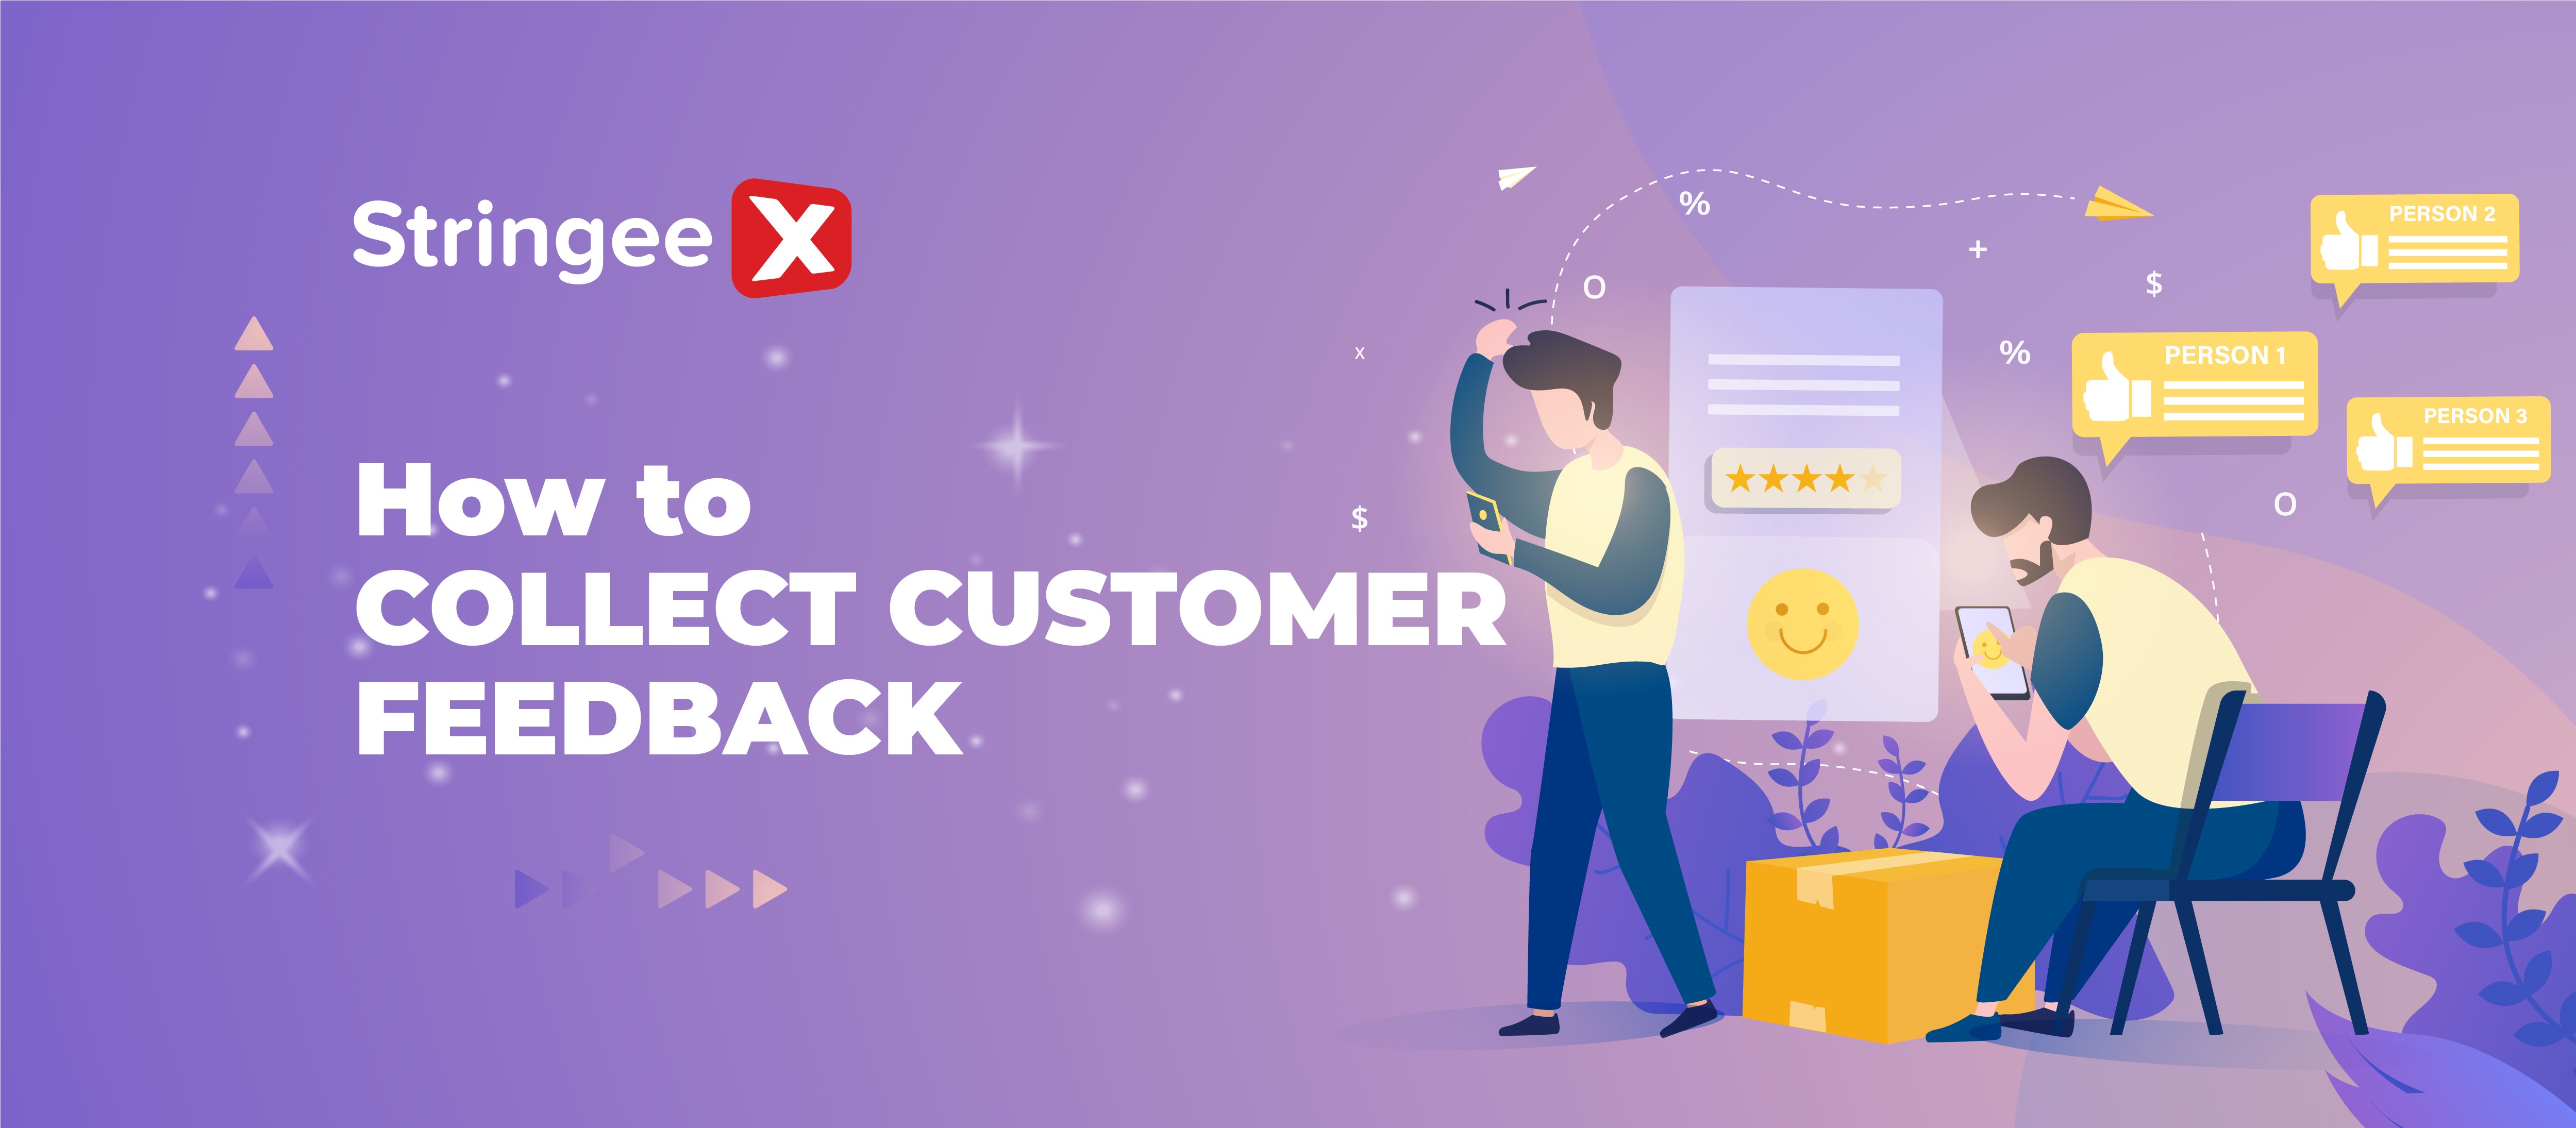 How to collect customer feedback quickly and effectively